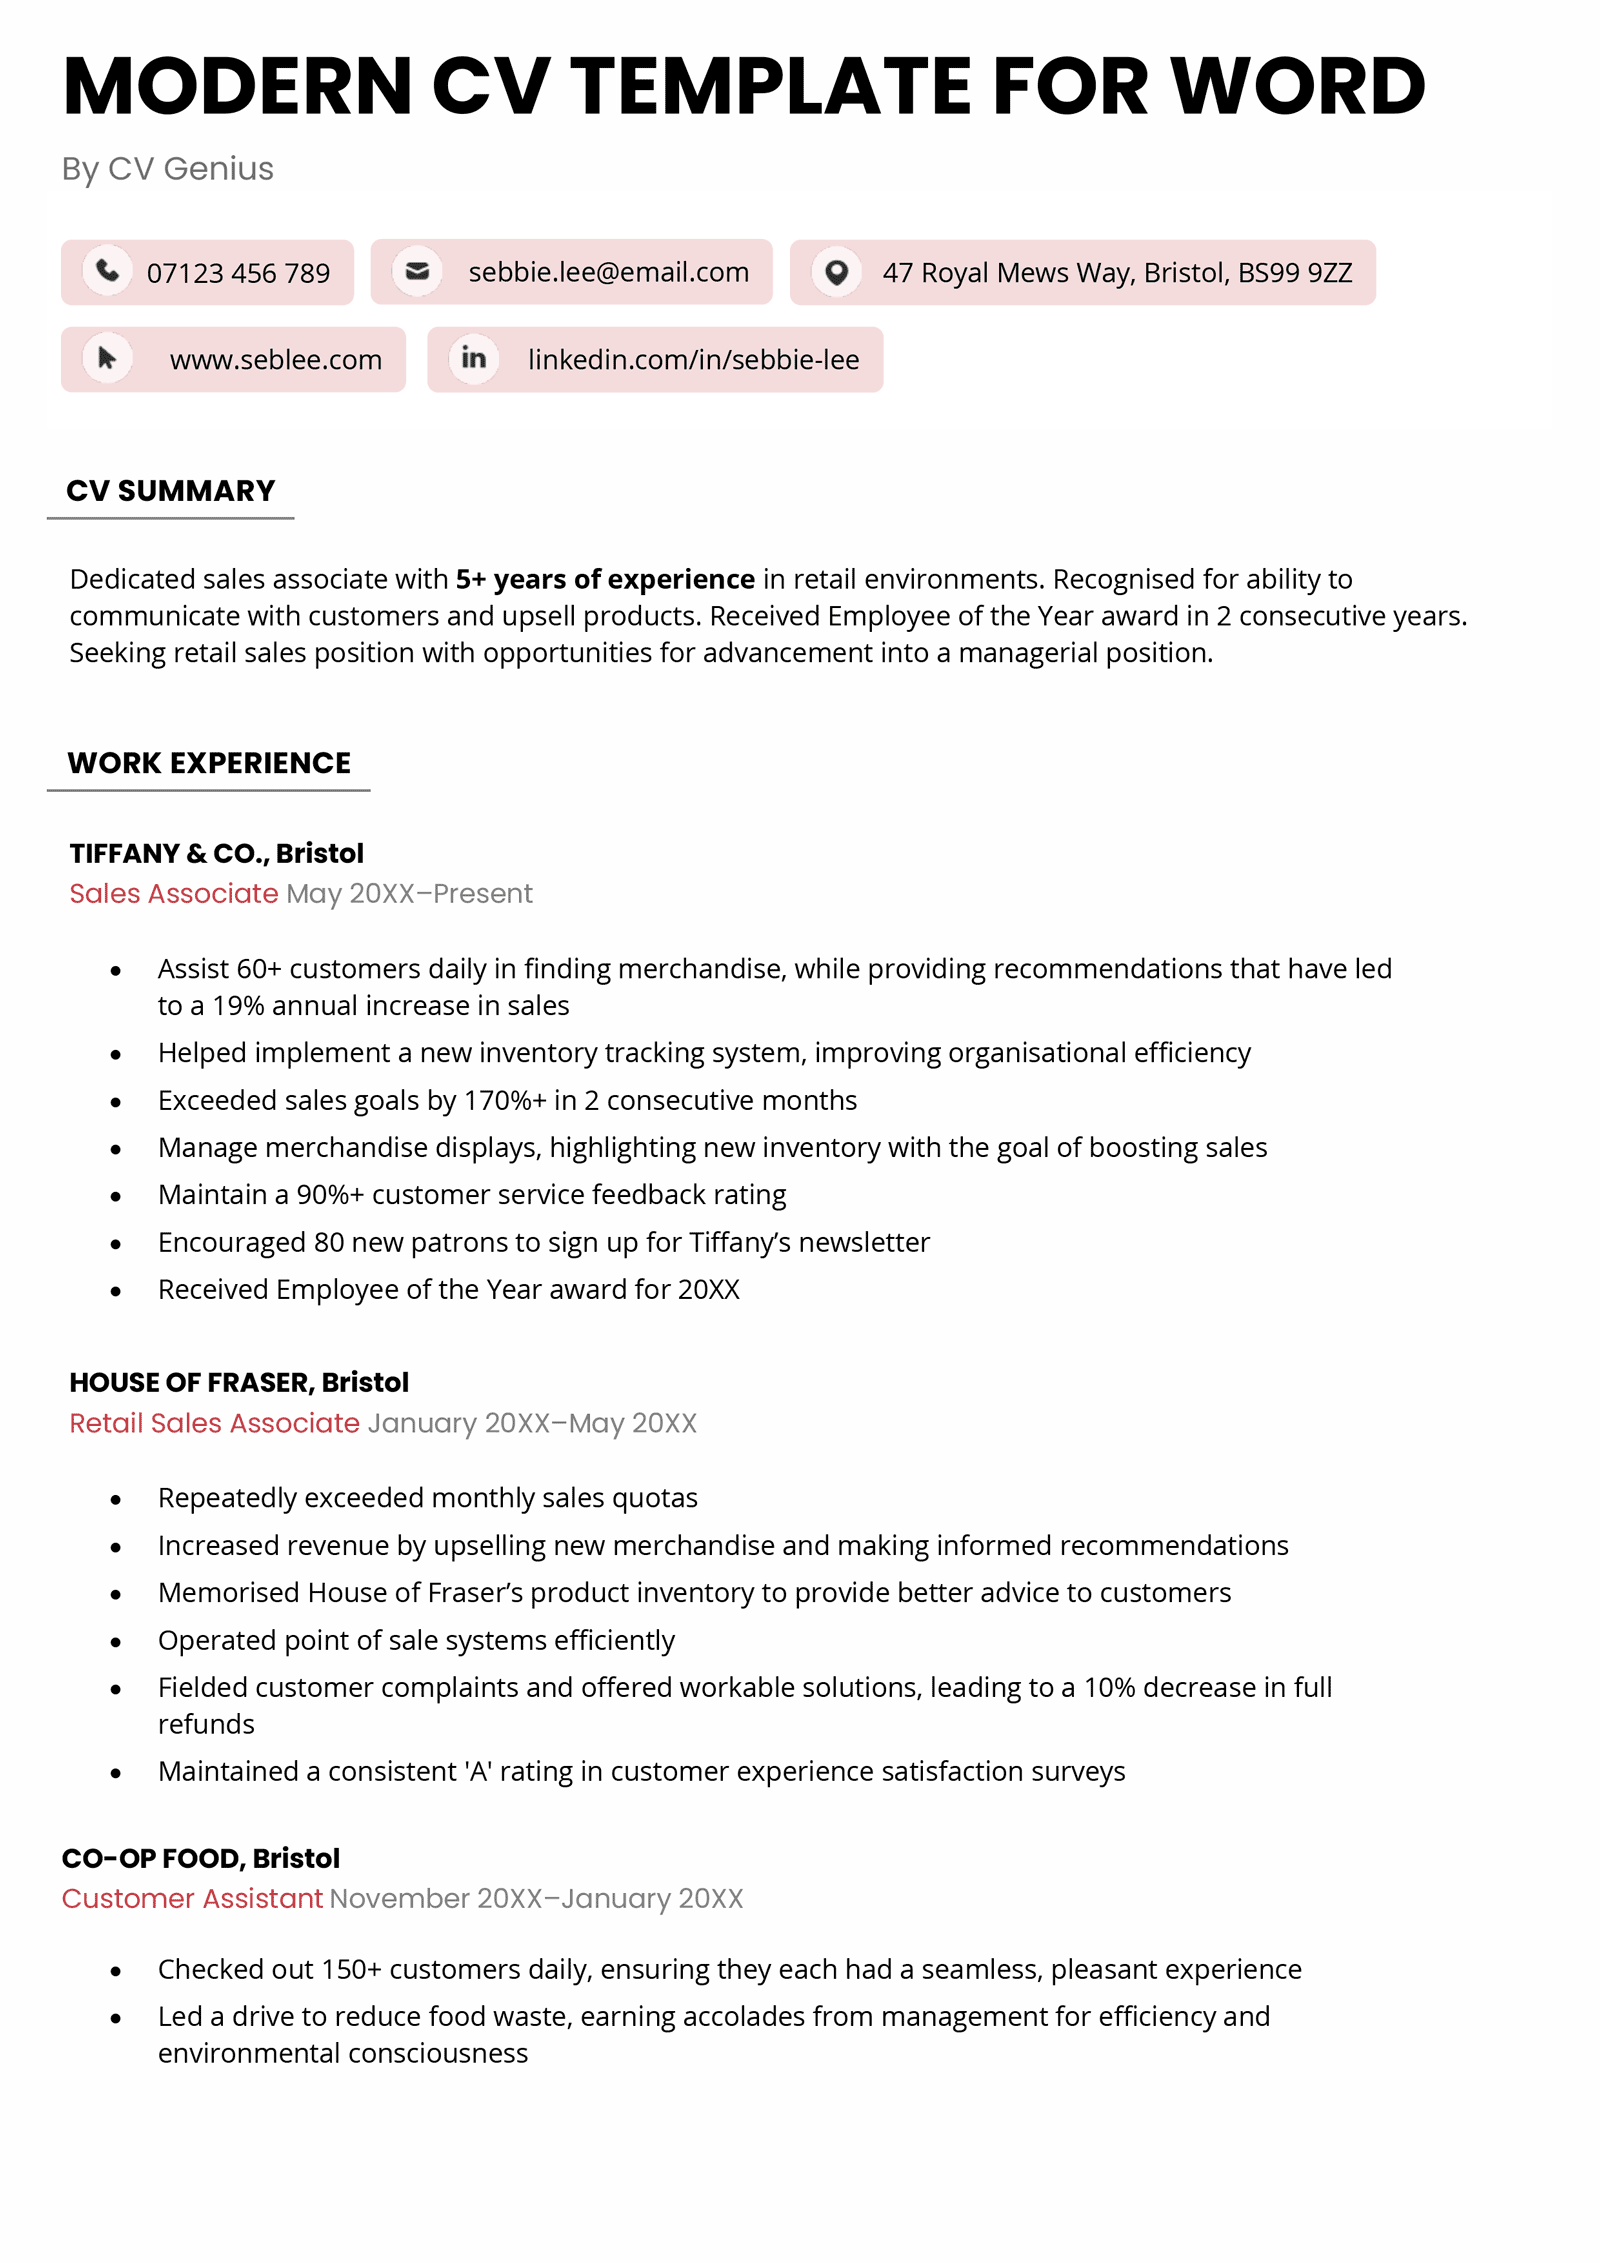 A modern CV template for Word that features a unique 3D effect because of a two-colour border element.